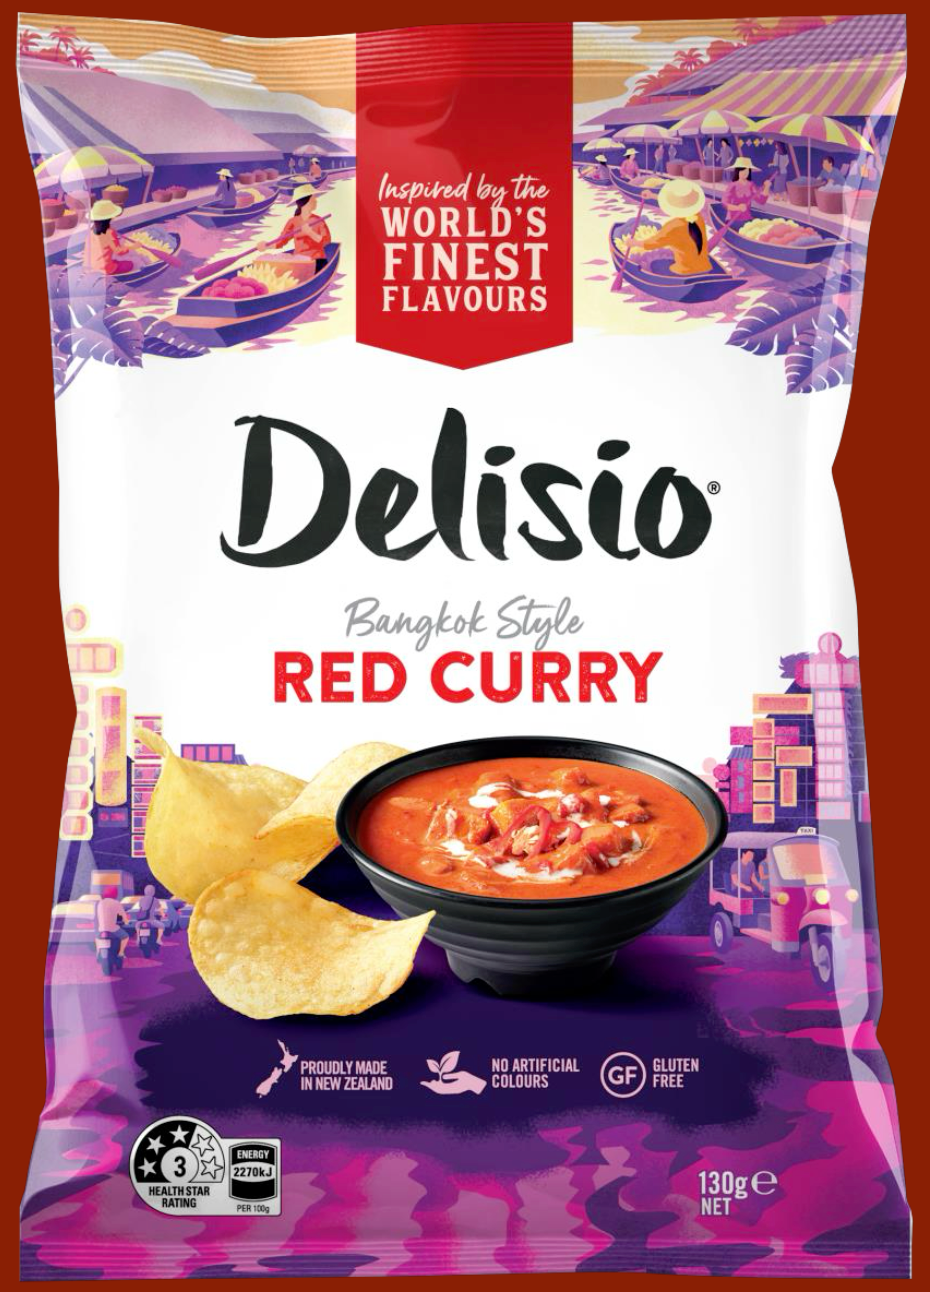 Delisio Bangkok Style Red Curry 130G